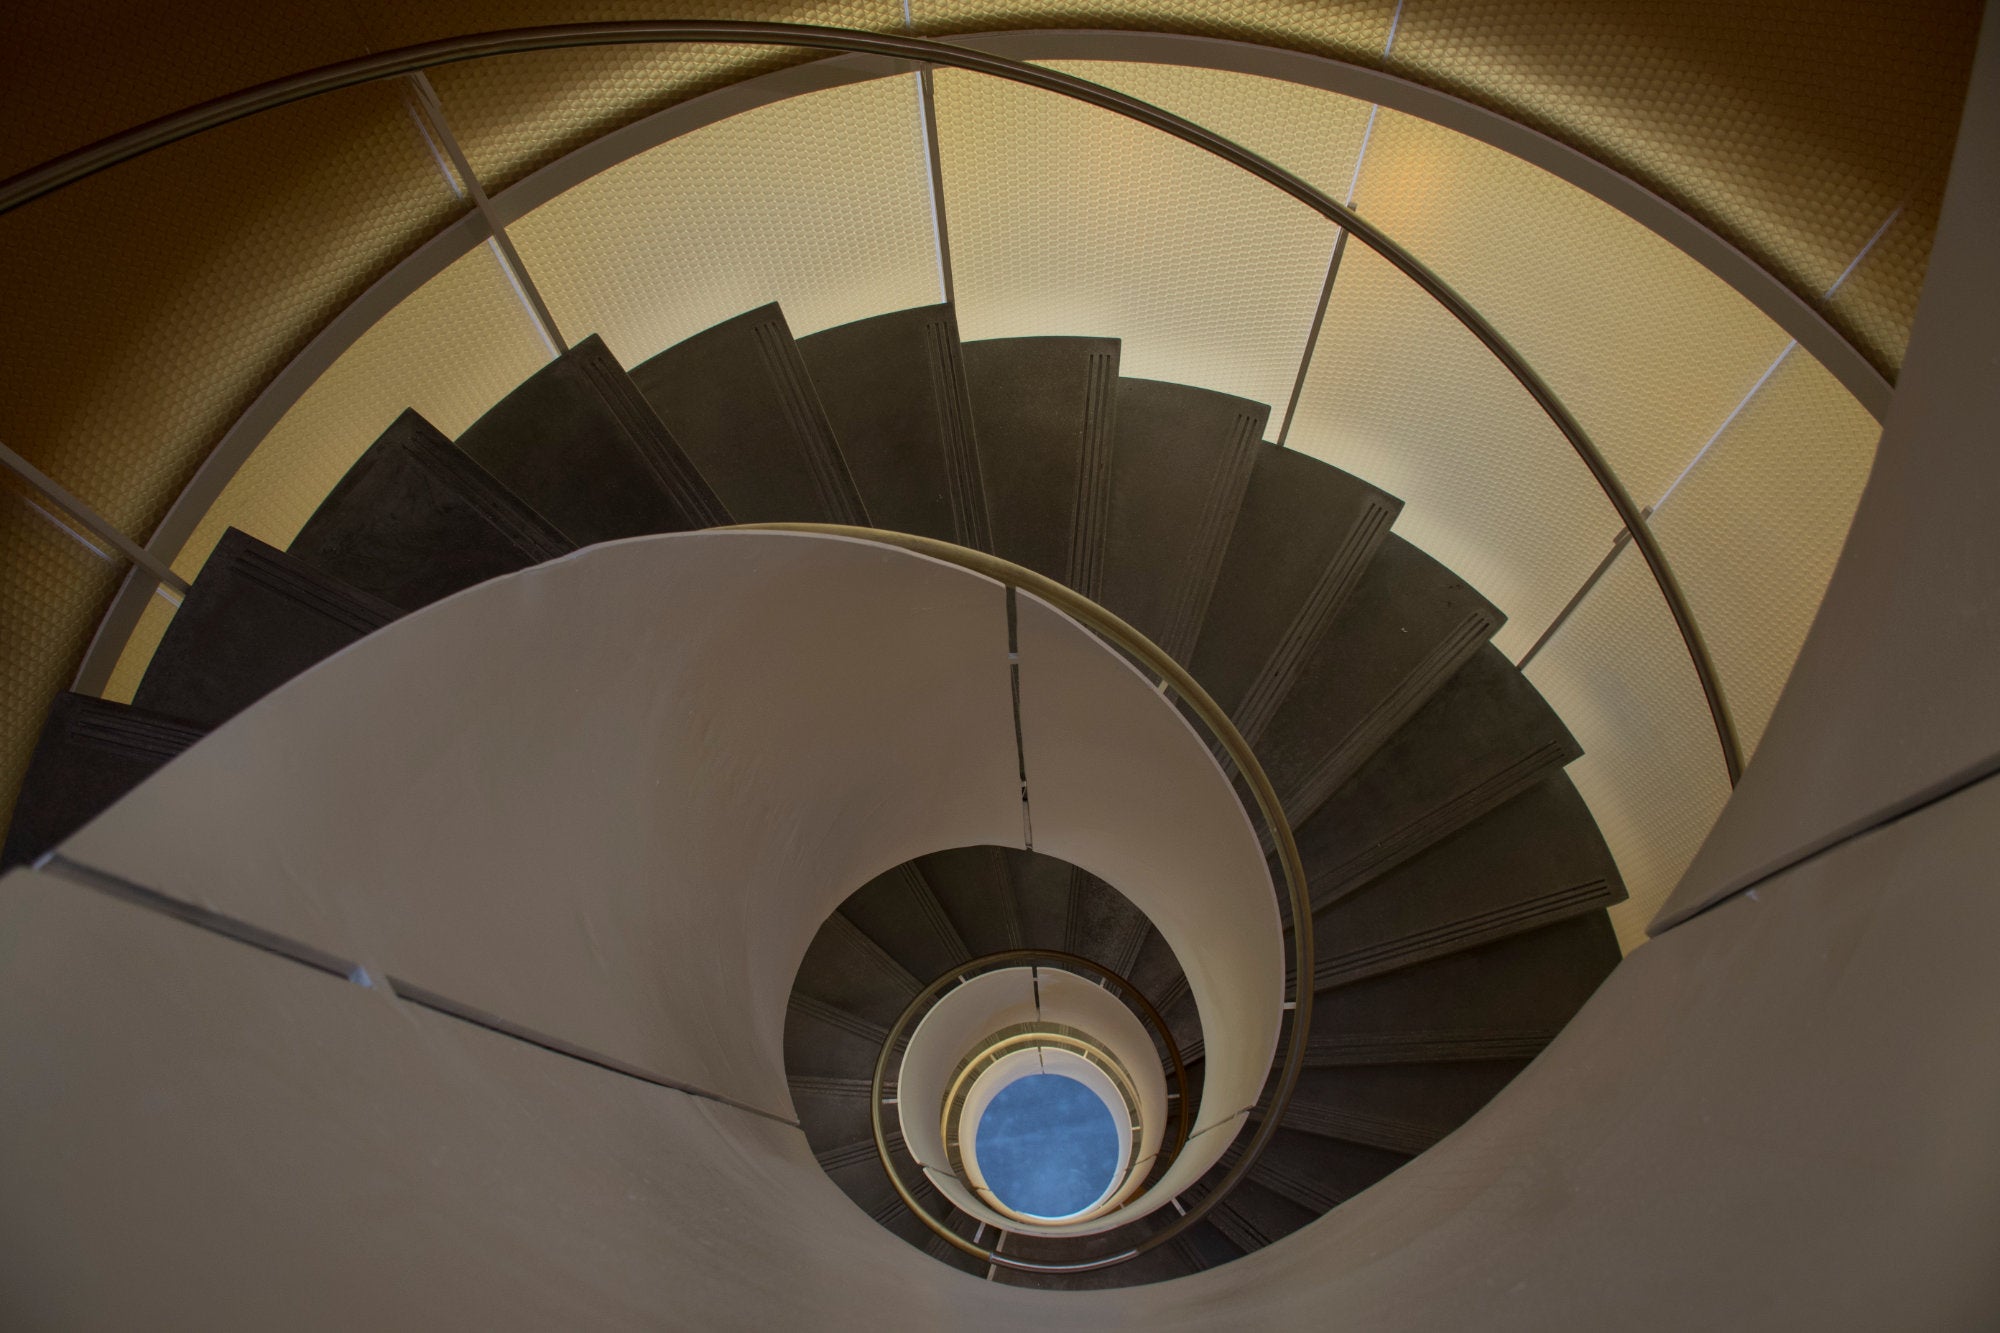 A view of the spiral staircase.